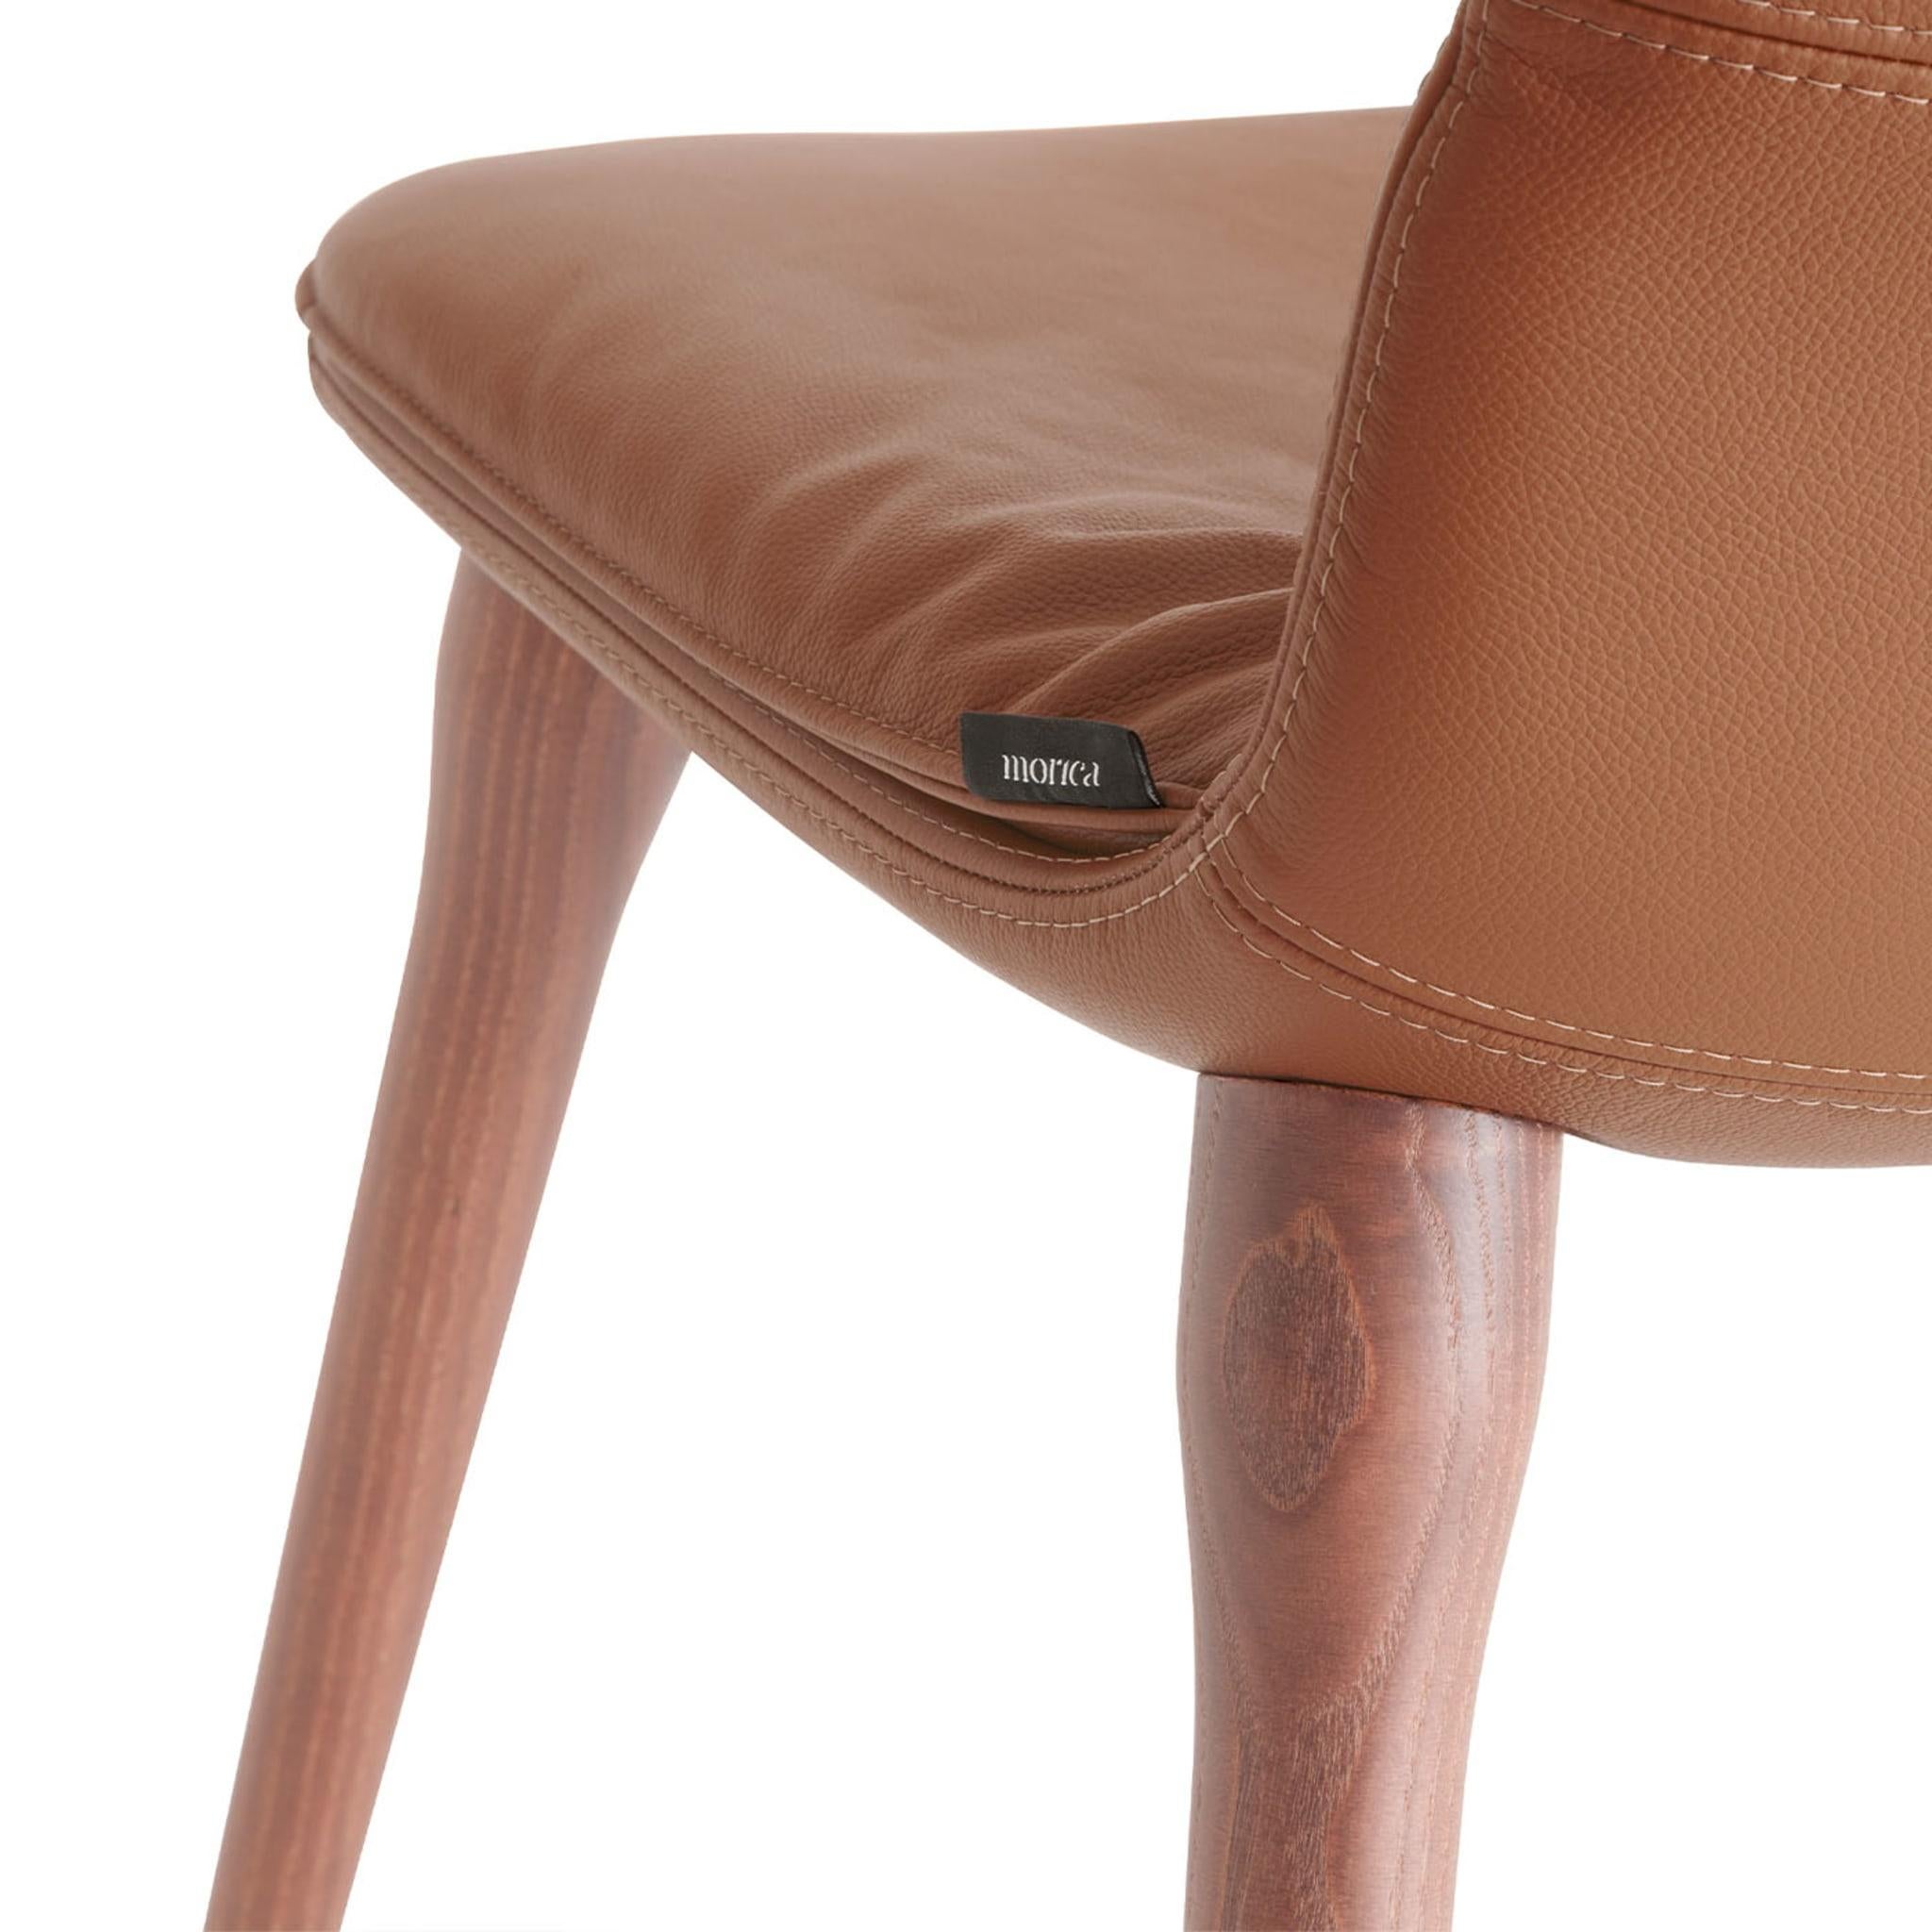 Italian Coco Cognac-Toned Leather Chair For Sale